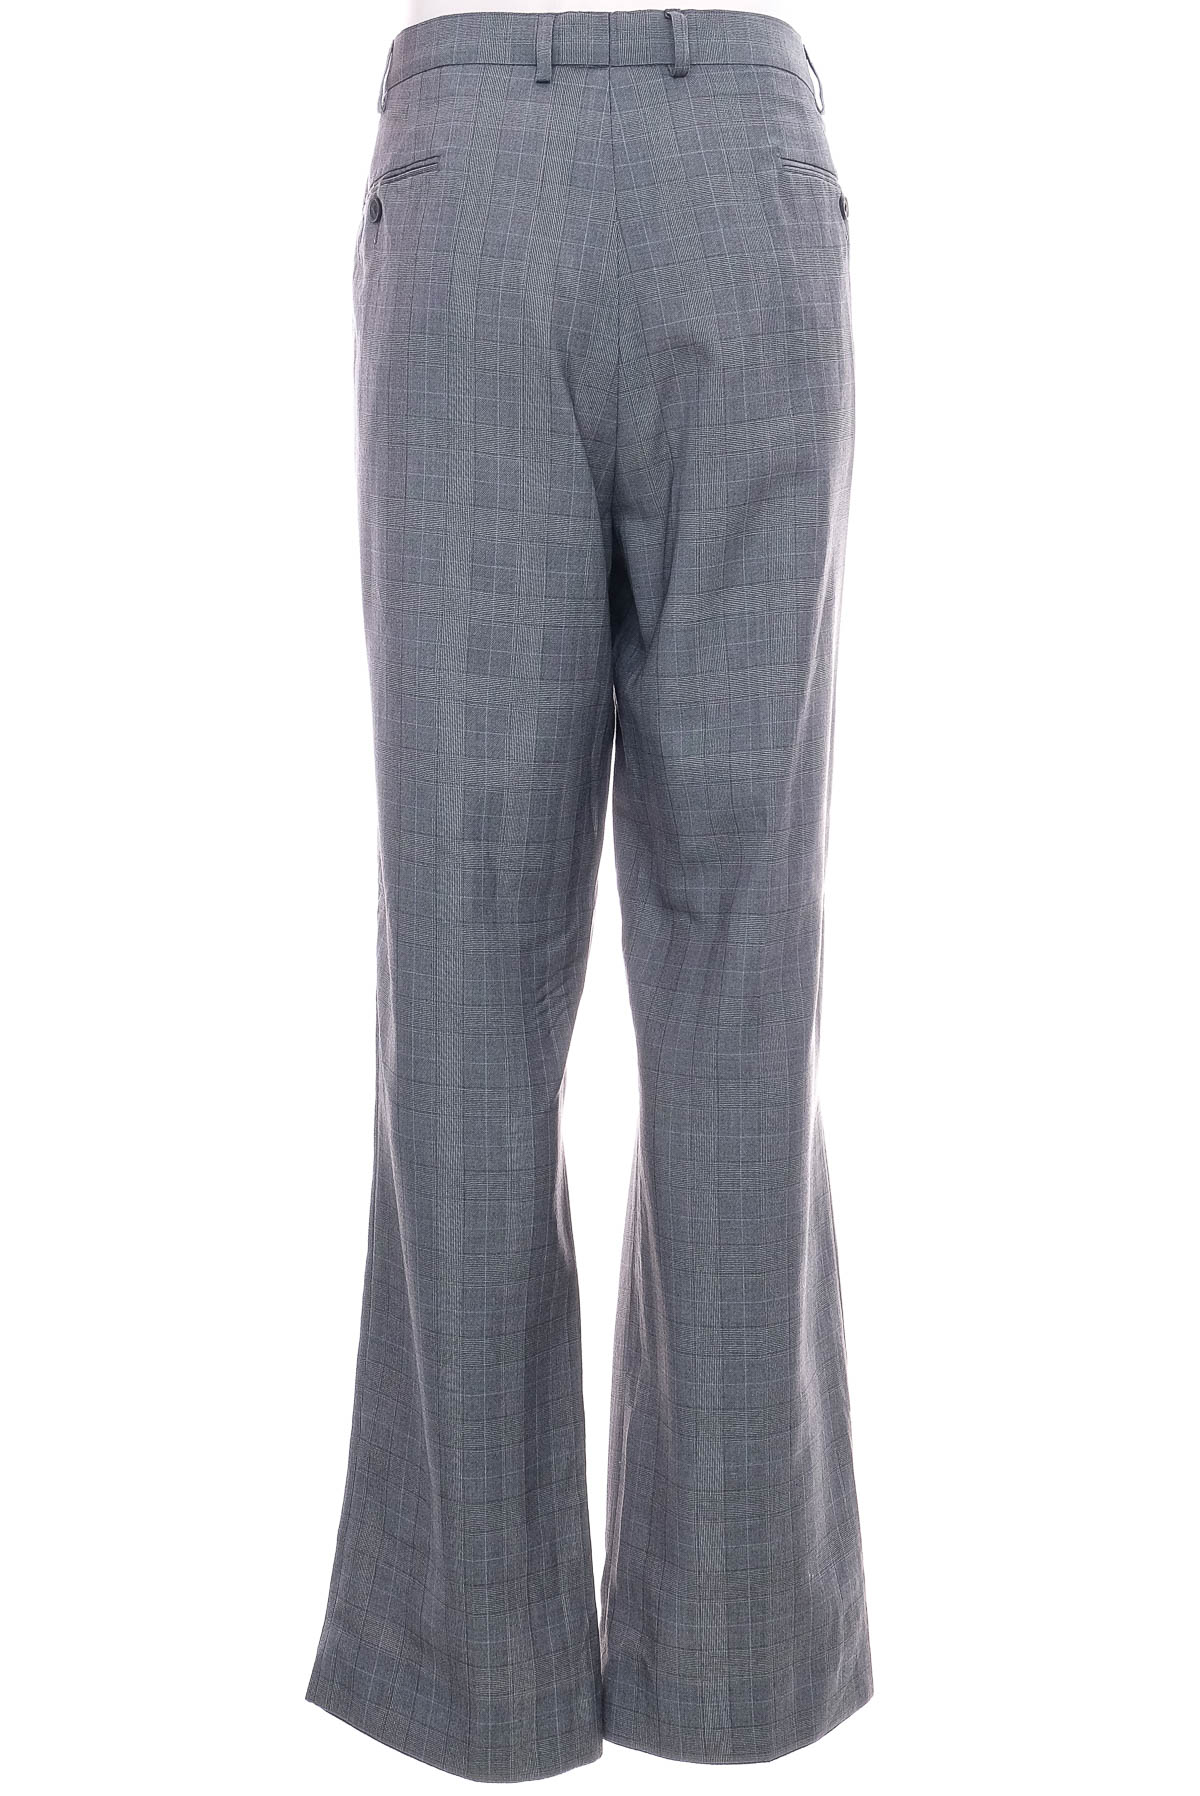 Men's trousers - Taylor & Wright by Matalan - 1